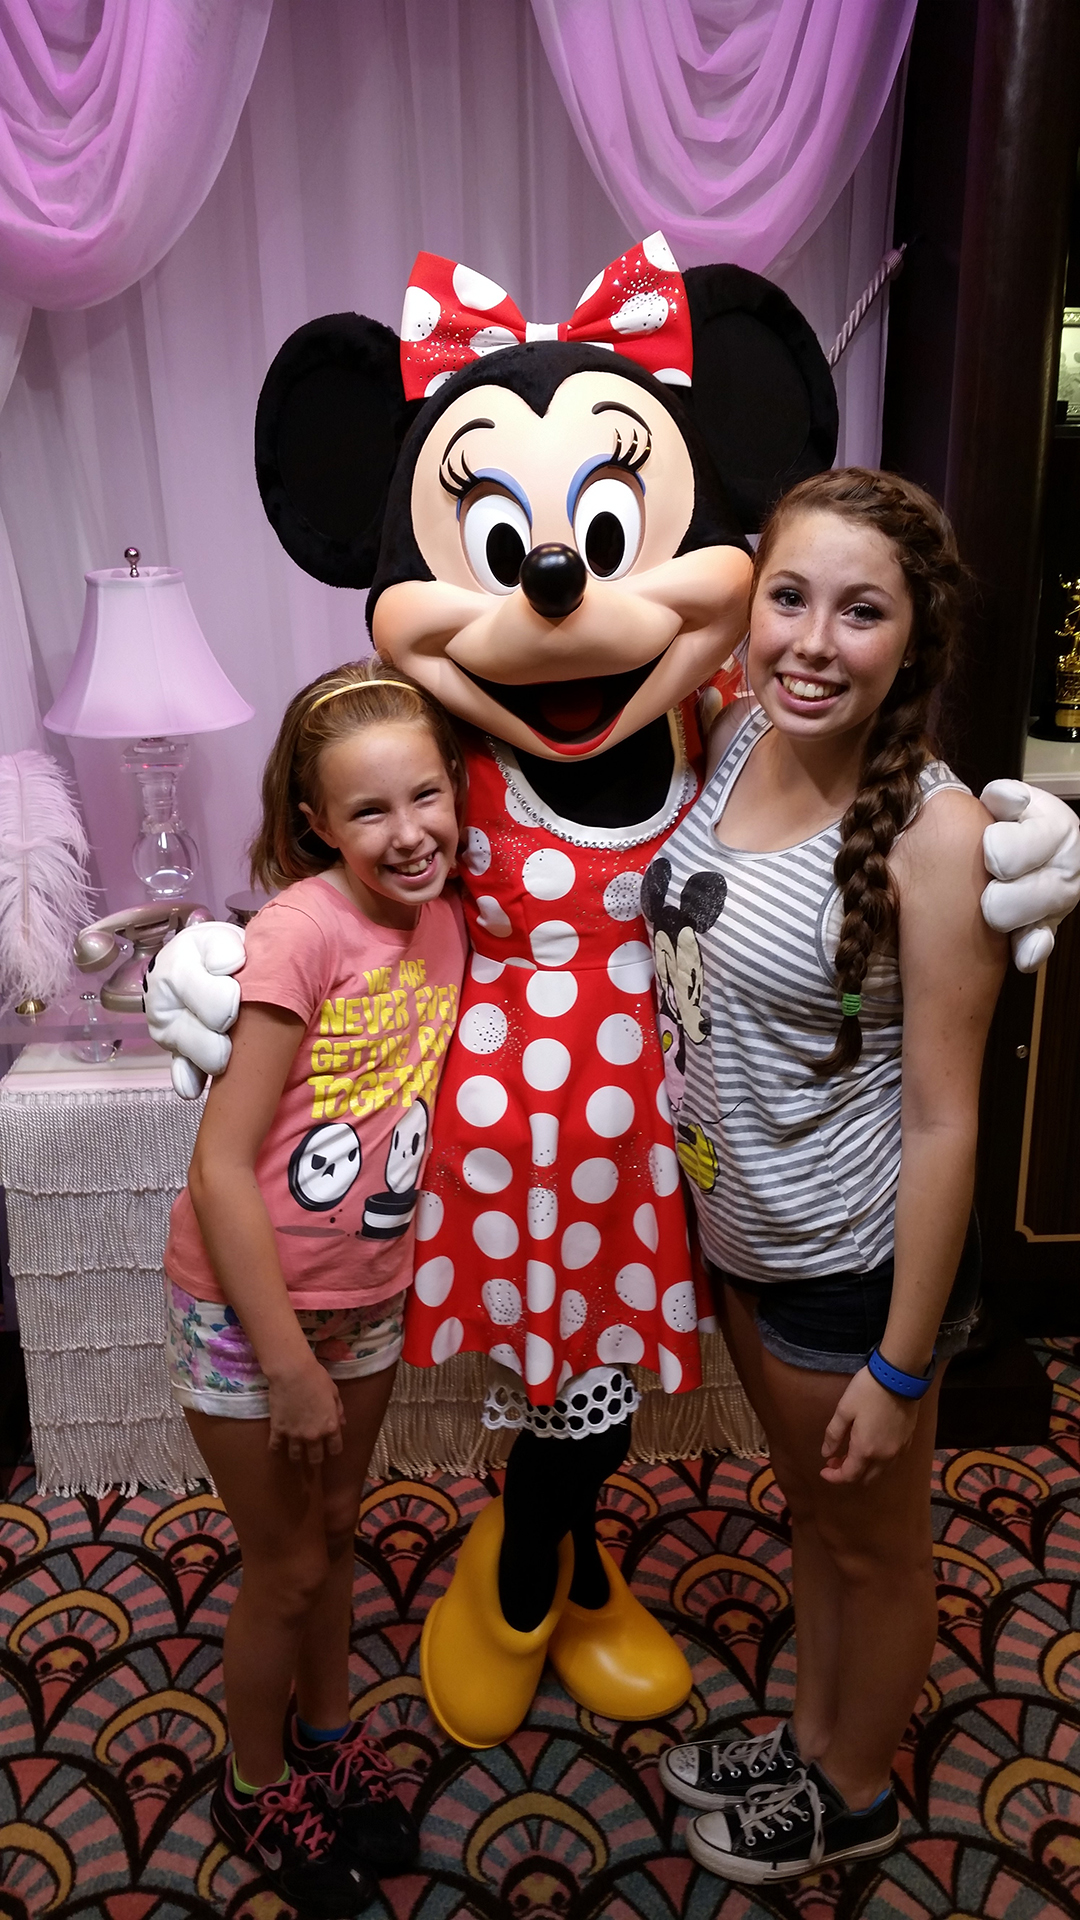 Meet Minnie Mouse at Hollywood Studios